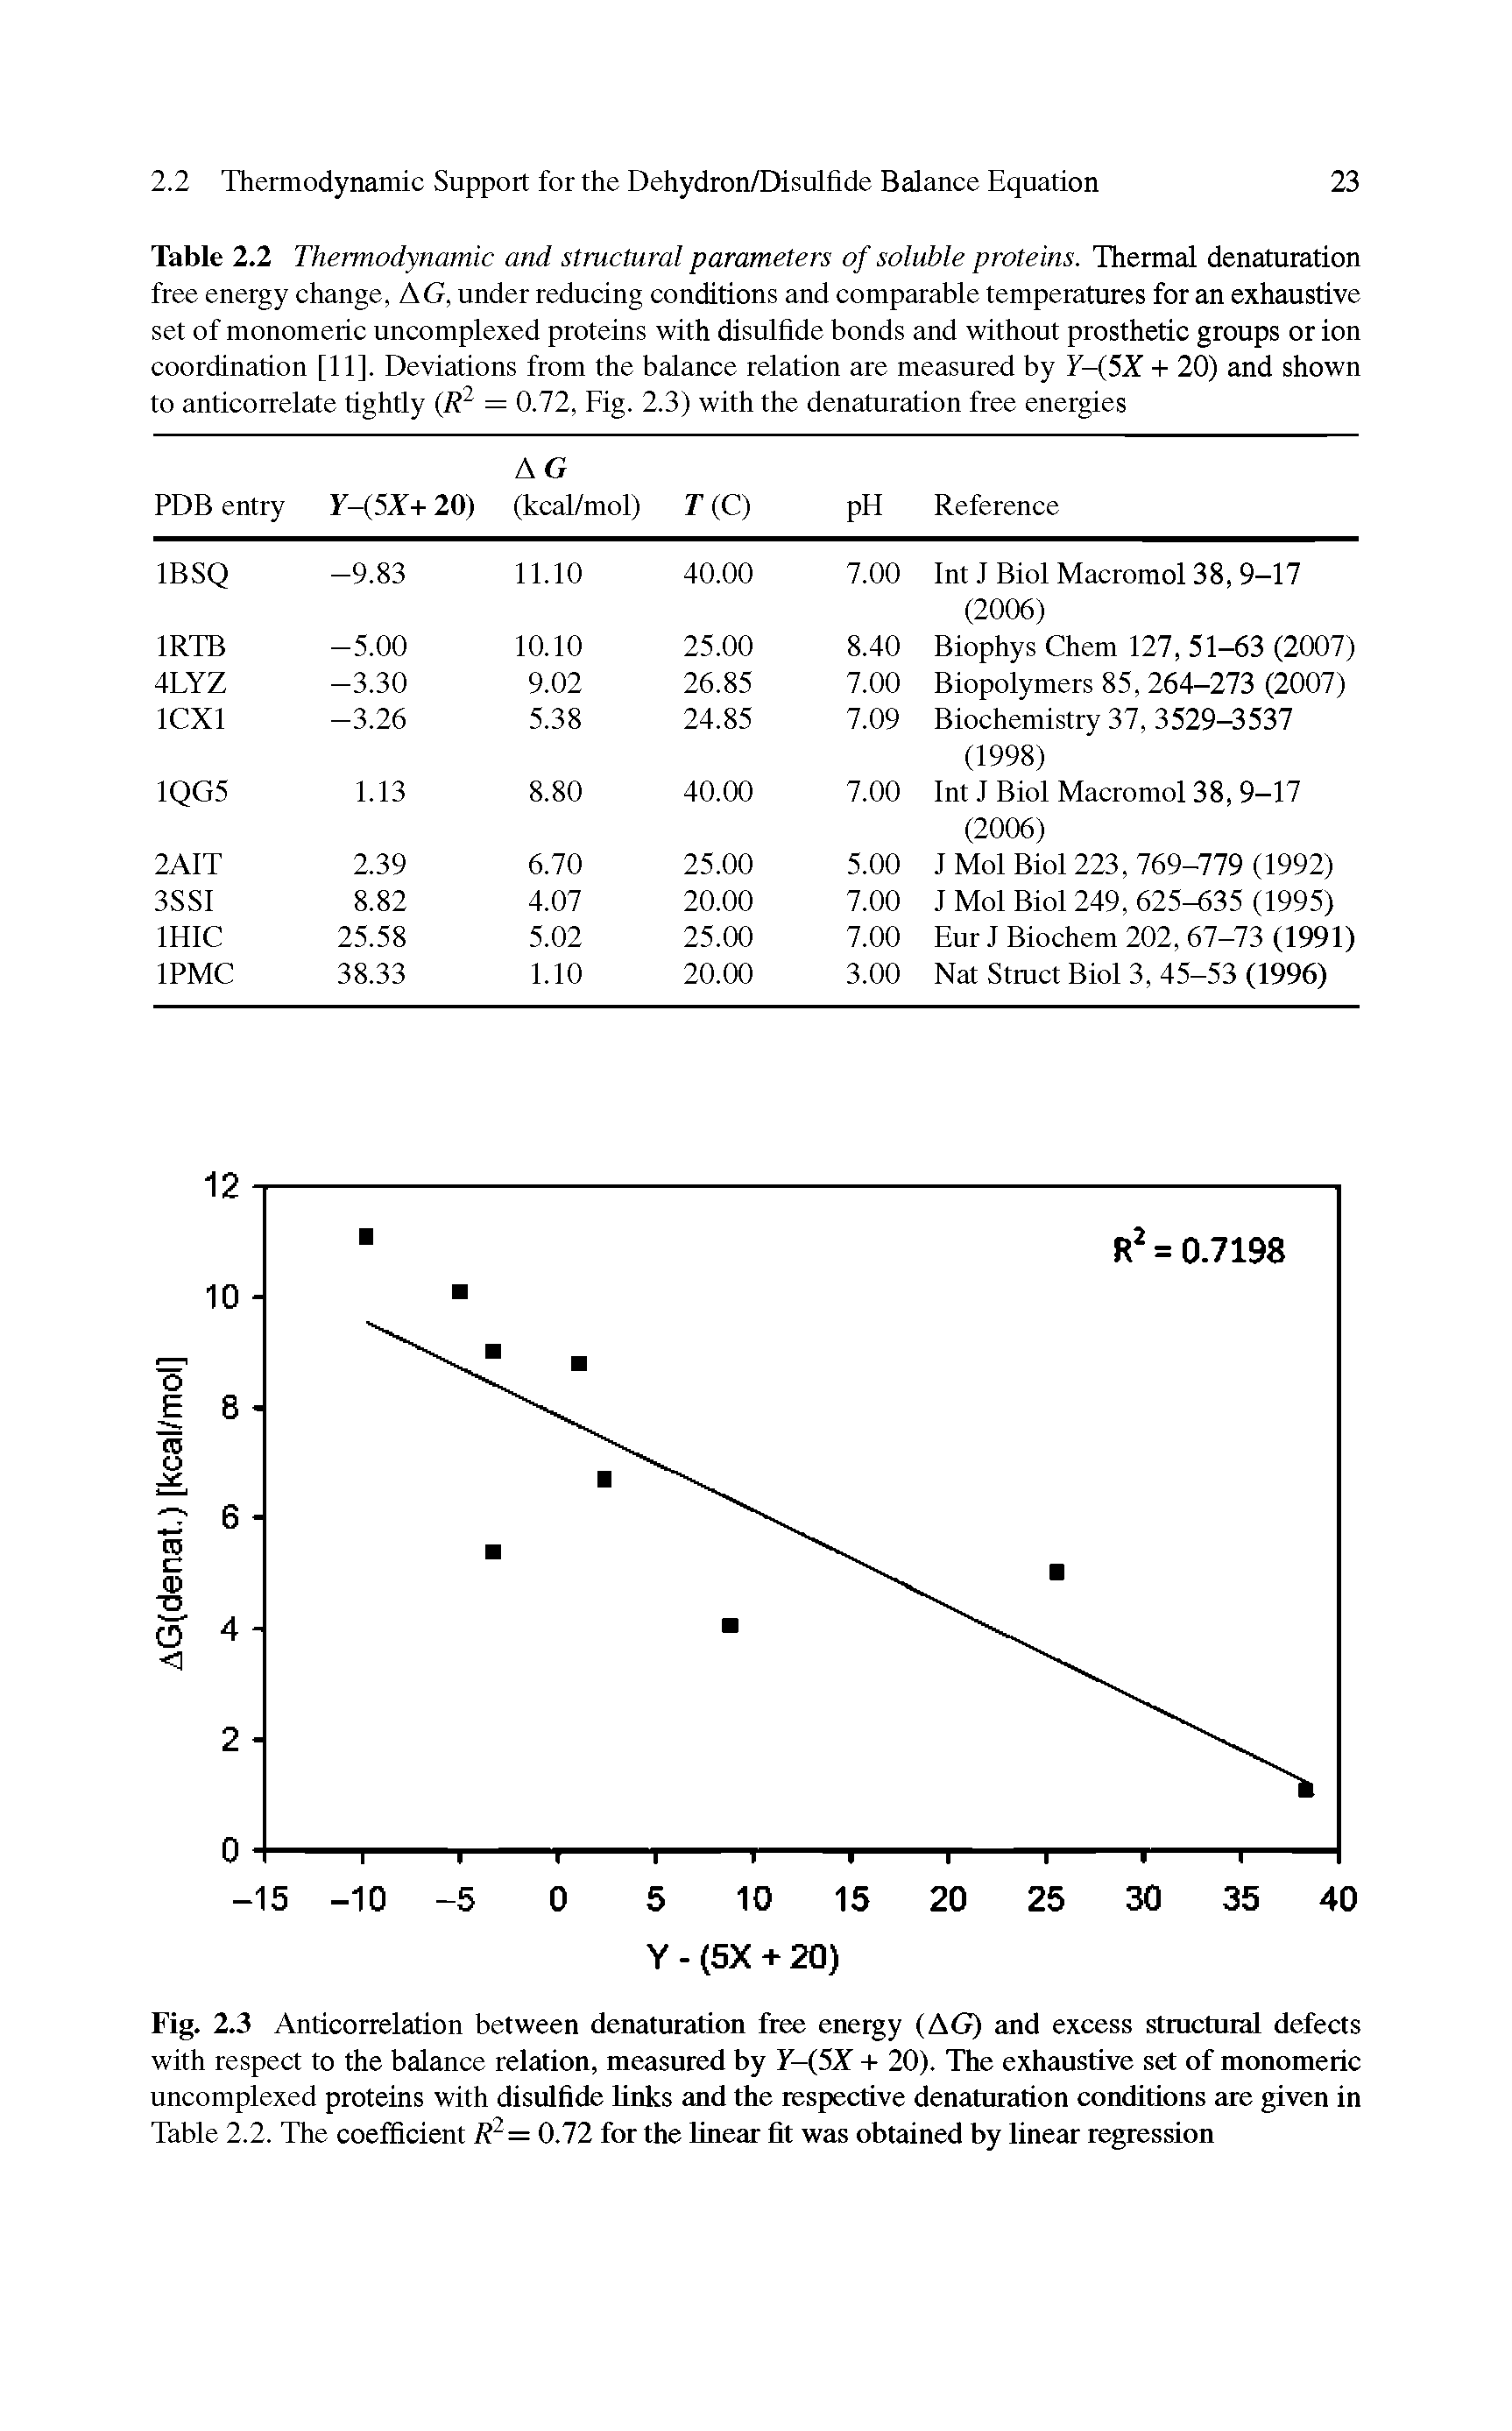 Table 2.2 Thermodynamic and structural parameters of soluble proteins. Thermal denaturation free energy change, AG, under reducing conditions and comparable temperatures for an exhaustive set of monomeric uncomplexed proteins with disulfide bonds and without prosthetic groups or ion coordination [11]. Deviations from the balance relation are measured by Y-(5X + 20) and shown to anticorrelate tightly (R2 = 0.72, Fig. 2.3) with the denaturation free energies...